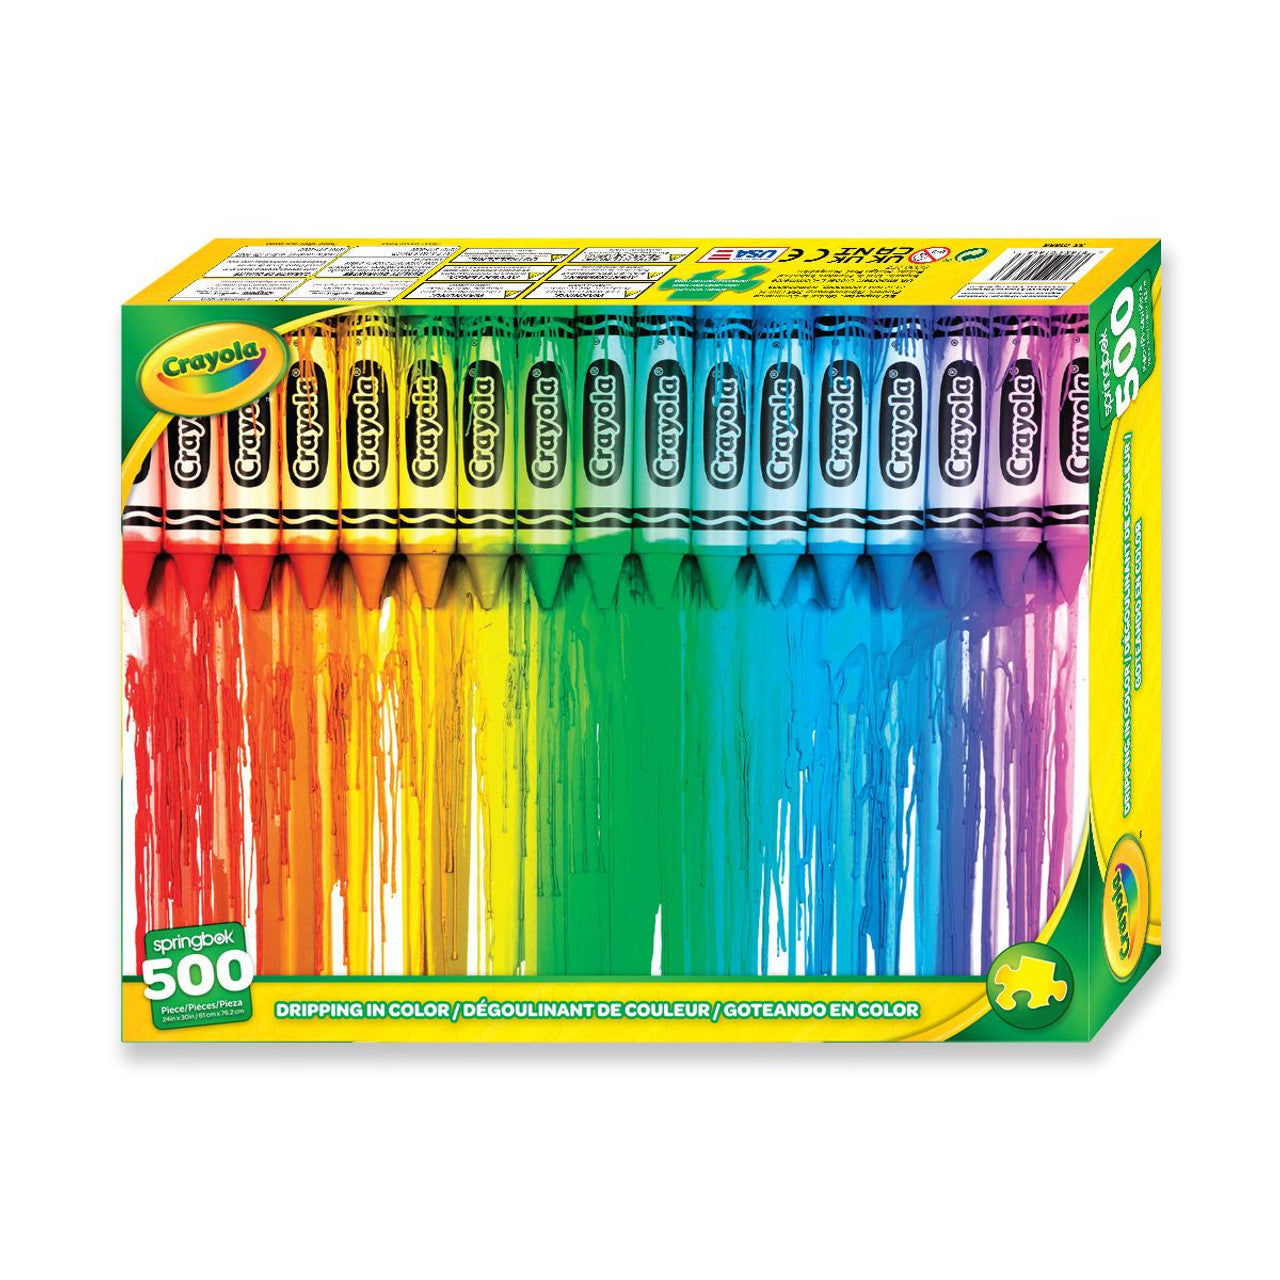 Dripping in color Crayola puzzle box